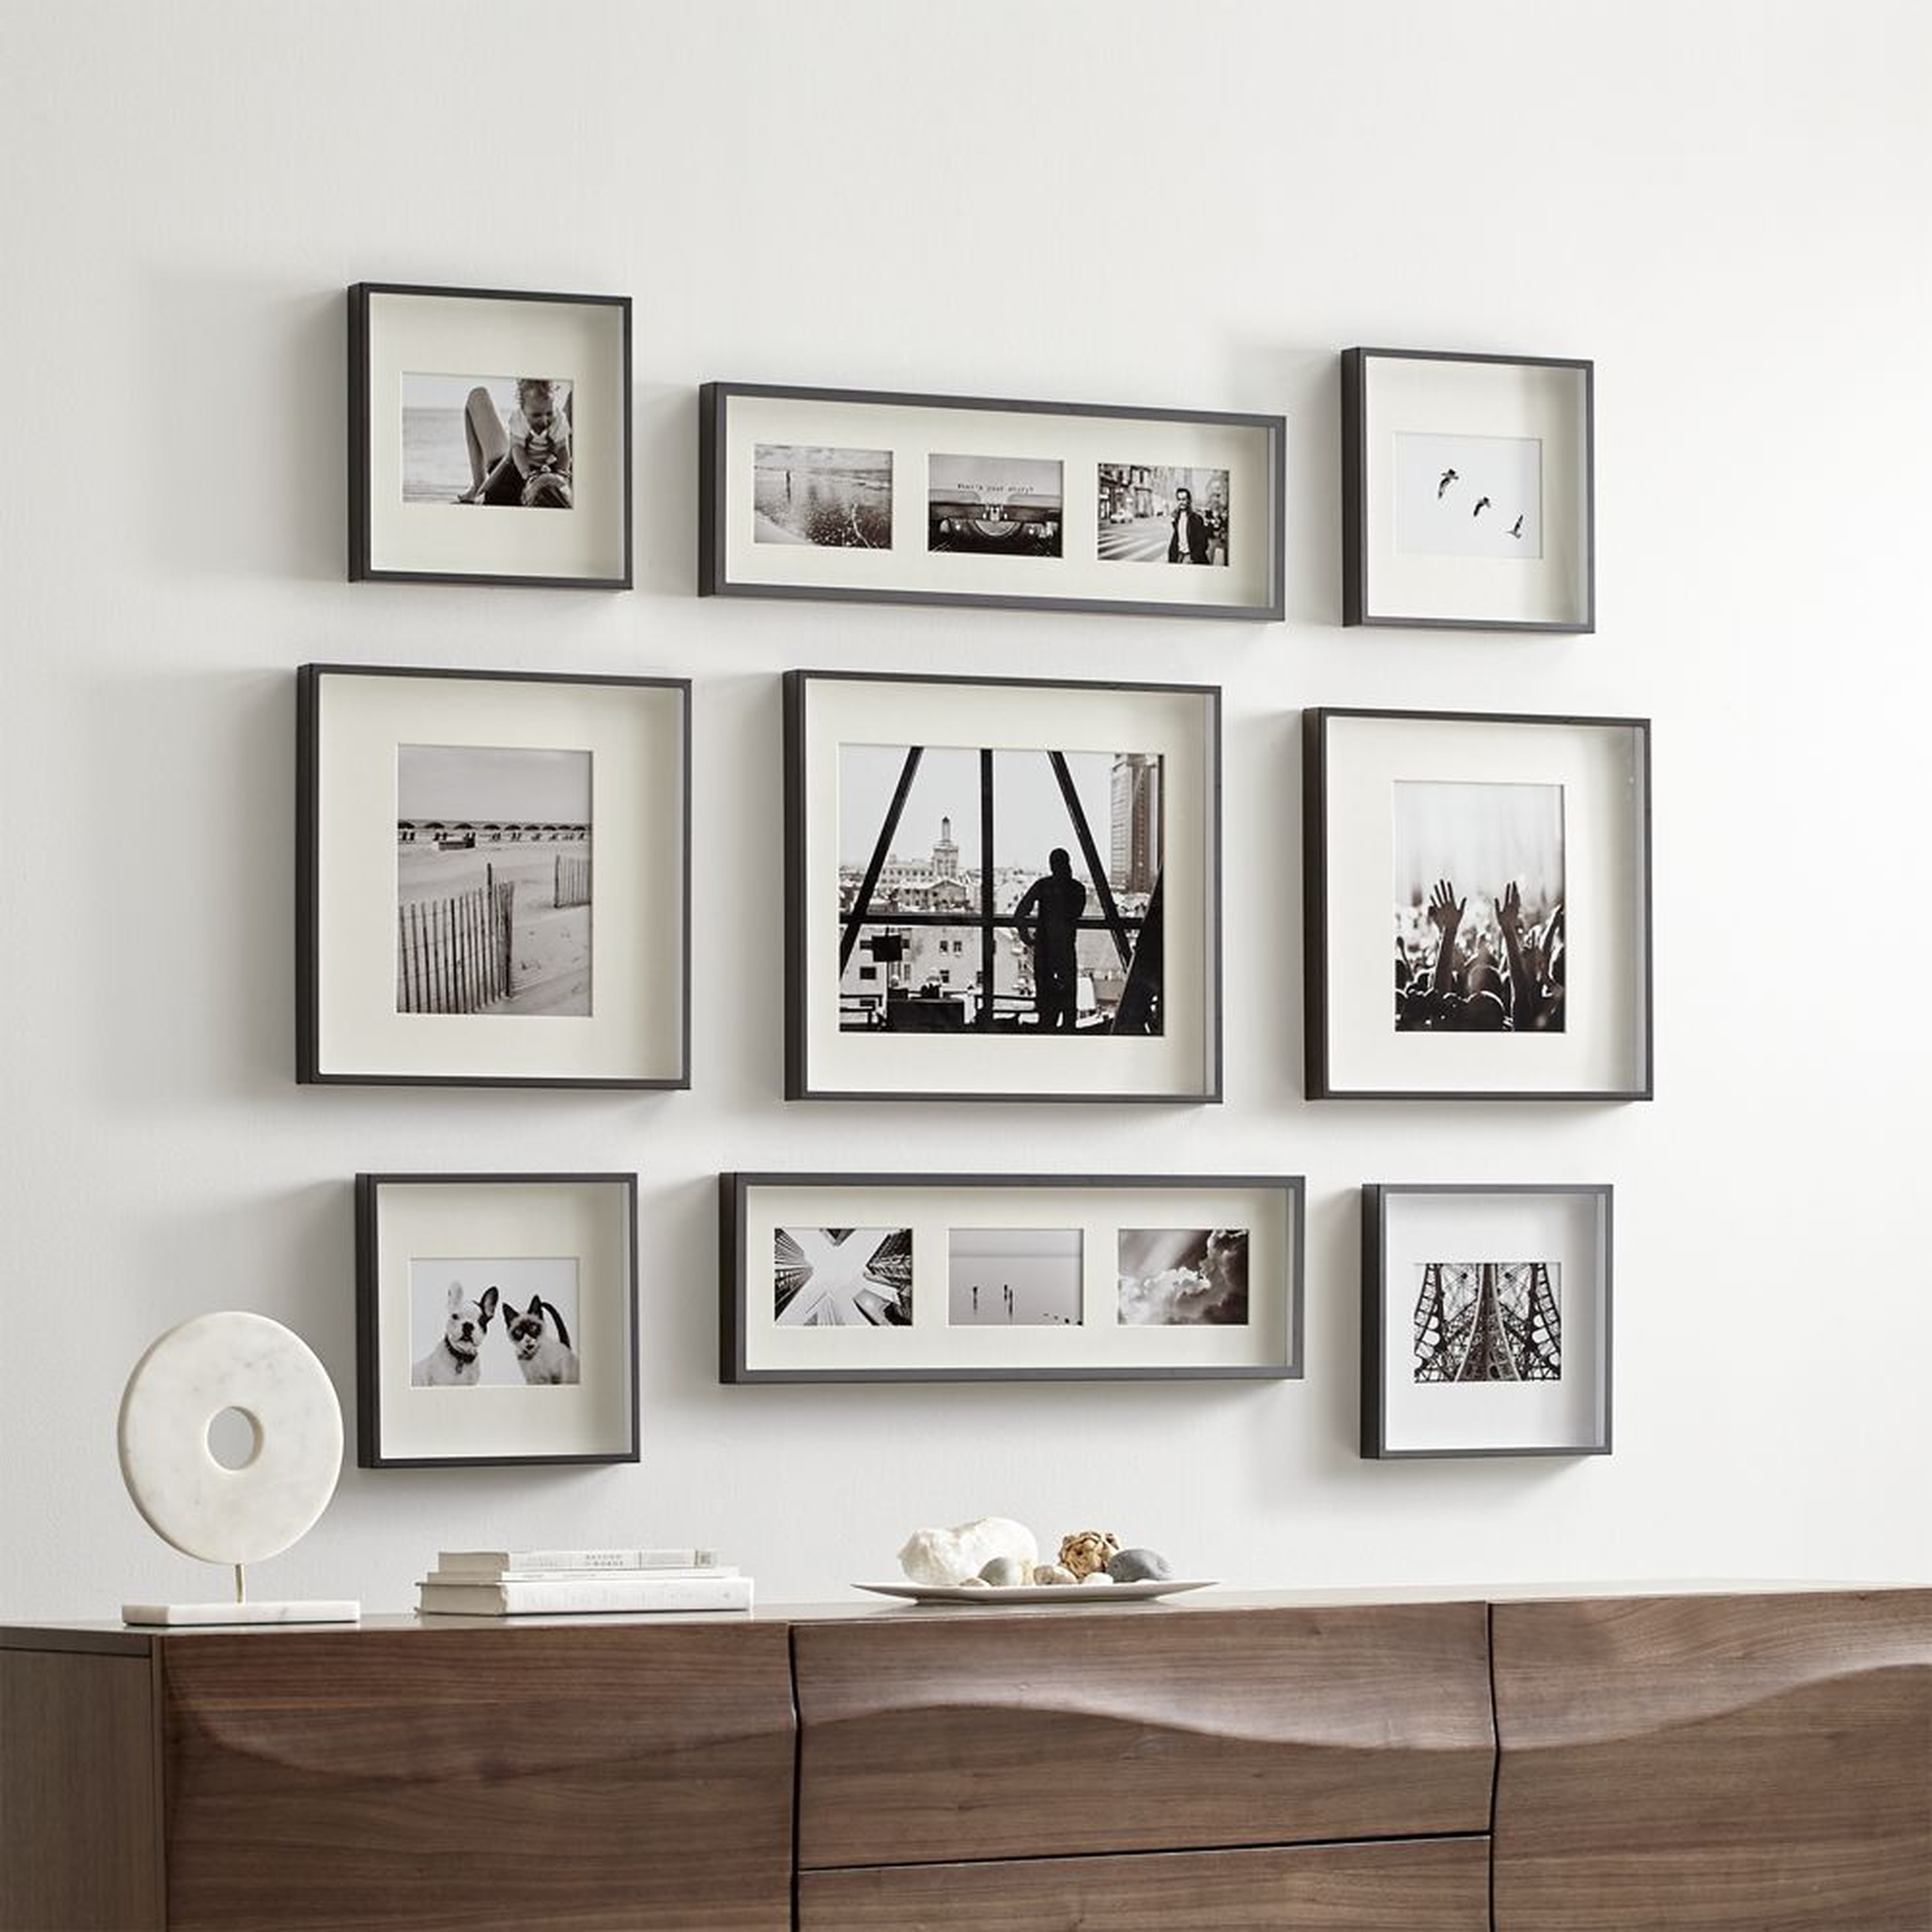 Brushed Gunmetal Picture Frame Gallery, Set of 9 - Crate and Barrel